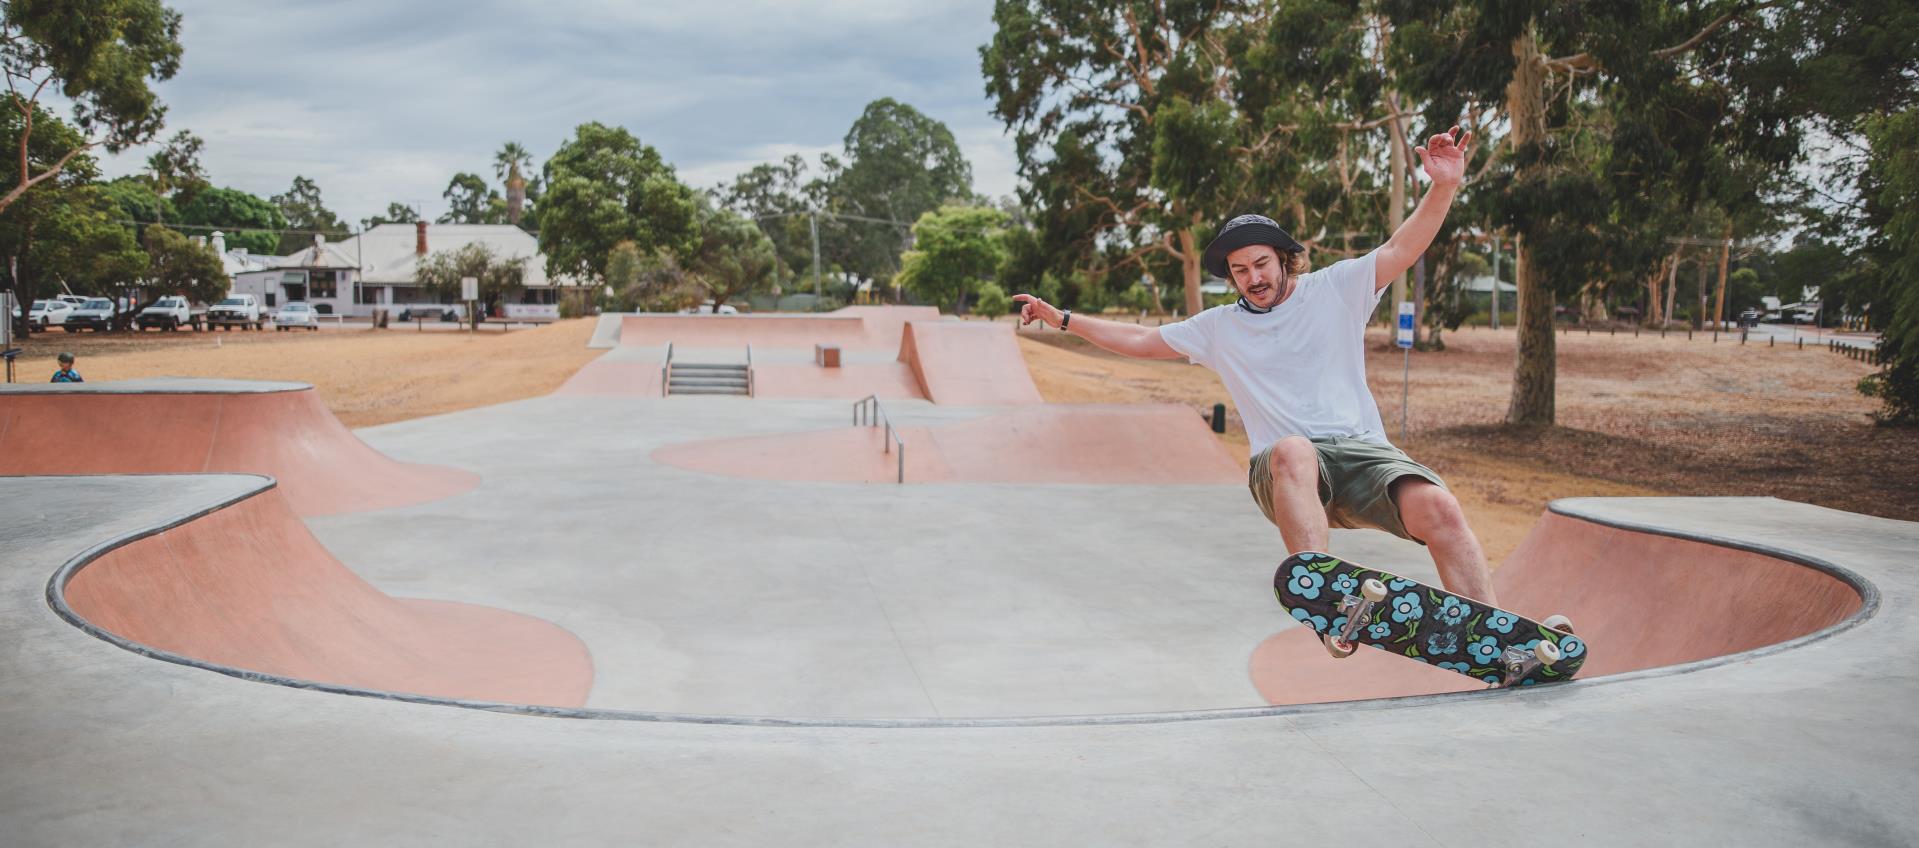 State-of-the-art skate park opens at Chidlow Village Green